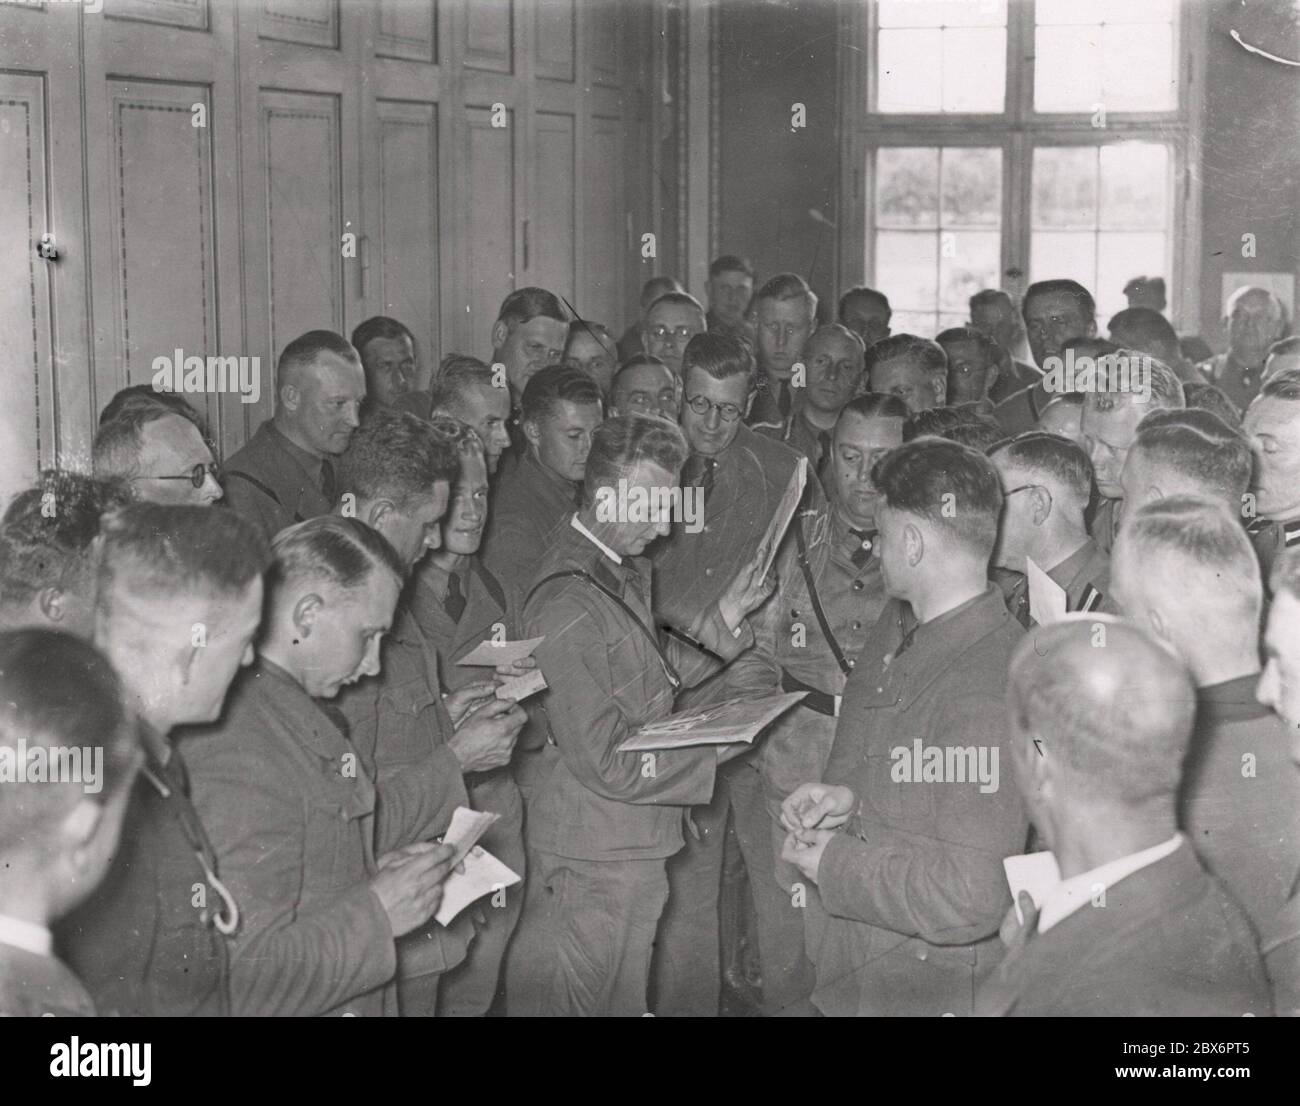 In the Reichsführer School of the Reich Labor Service (RAD) in Bernau near Berlin Heinrich Hoffmann Photographs 1933 Adolf Hitler's official photographer, and a Nazi politician and publisher, who was a member of Hitler's intimate circle. Stock Photo